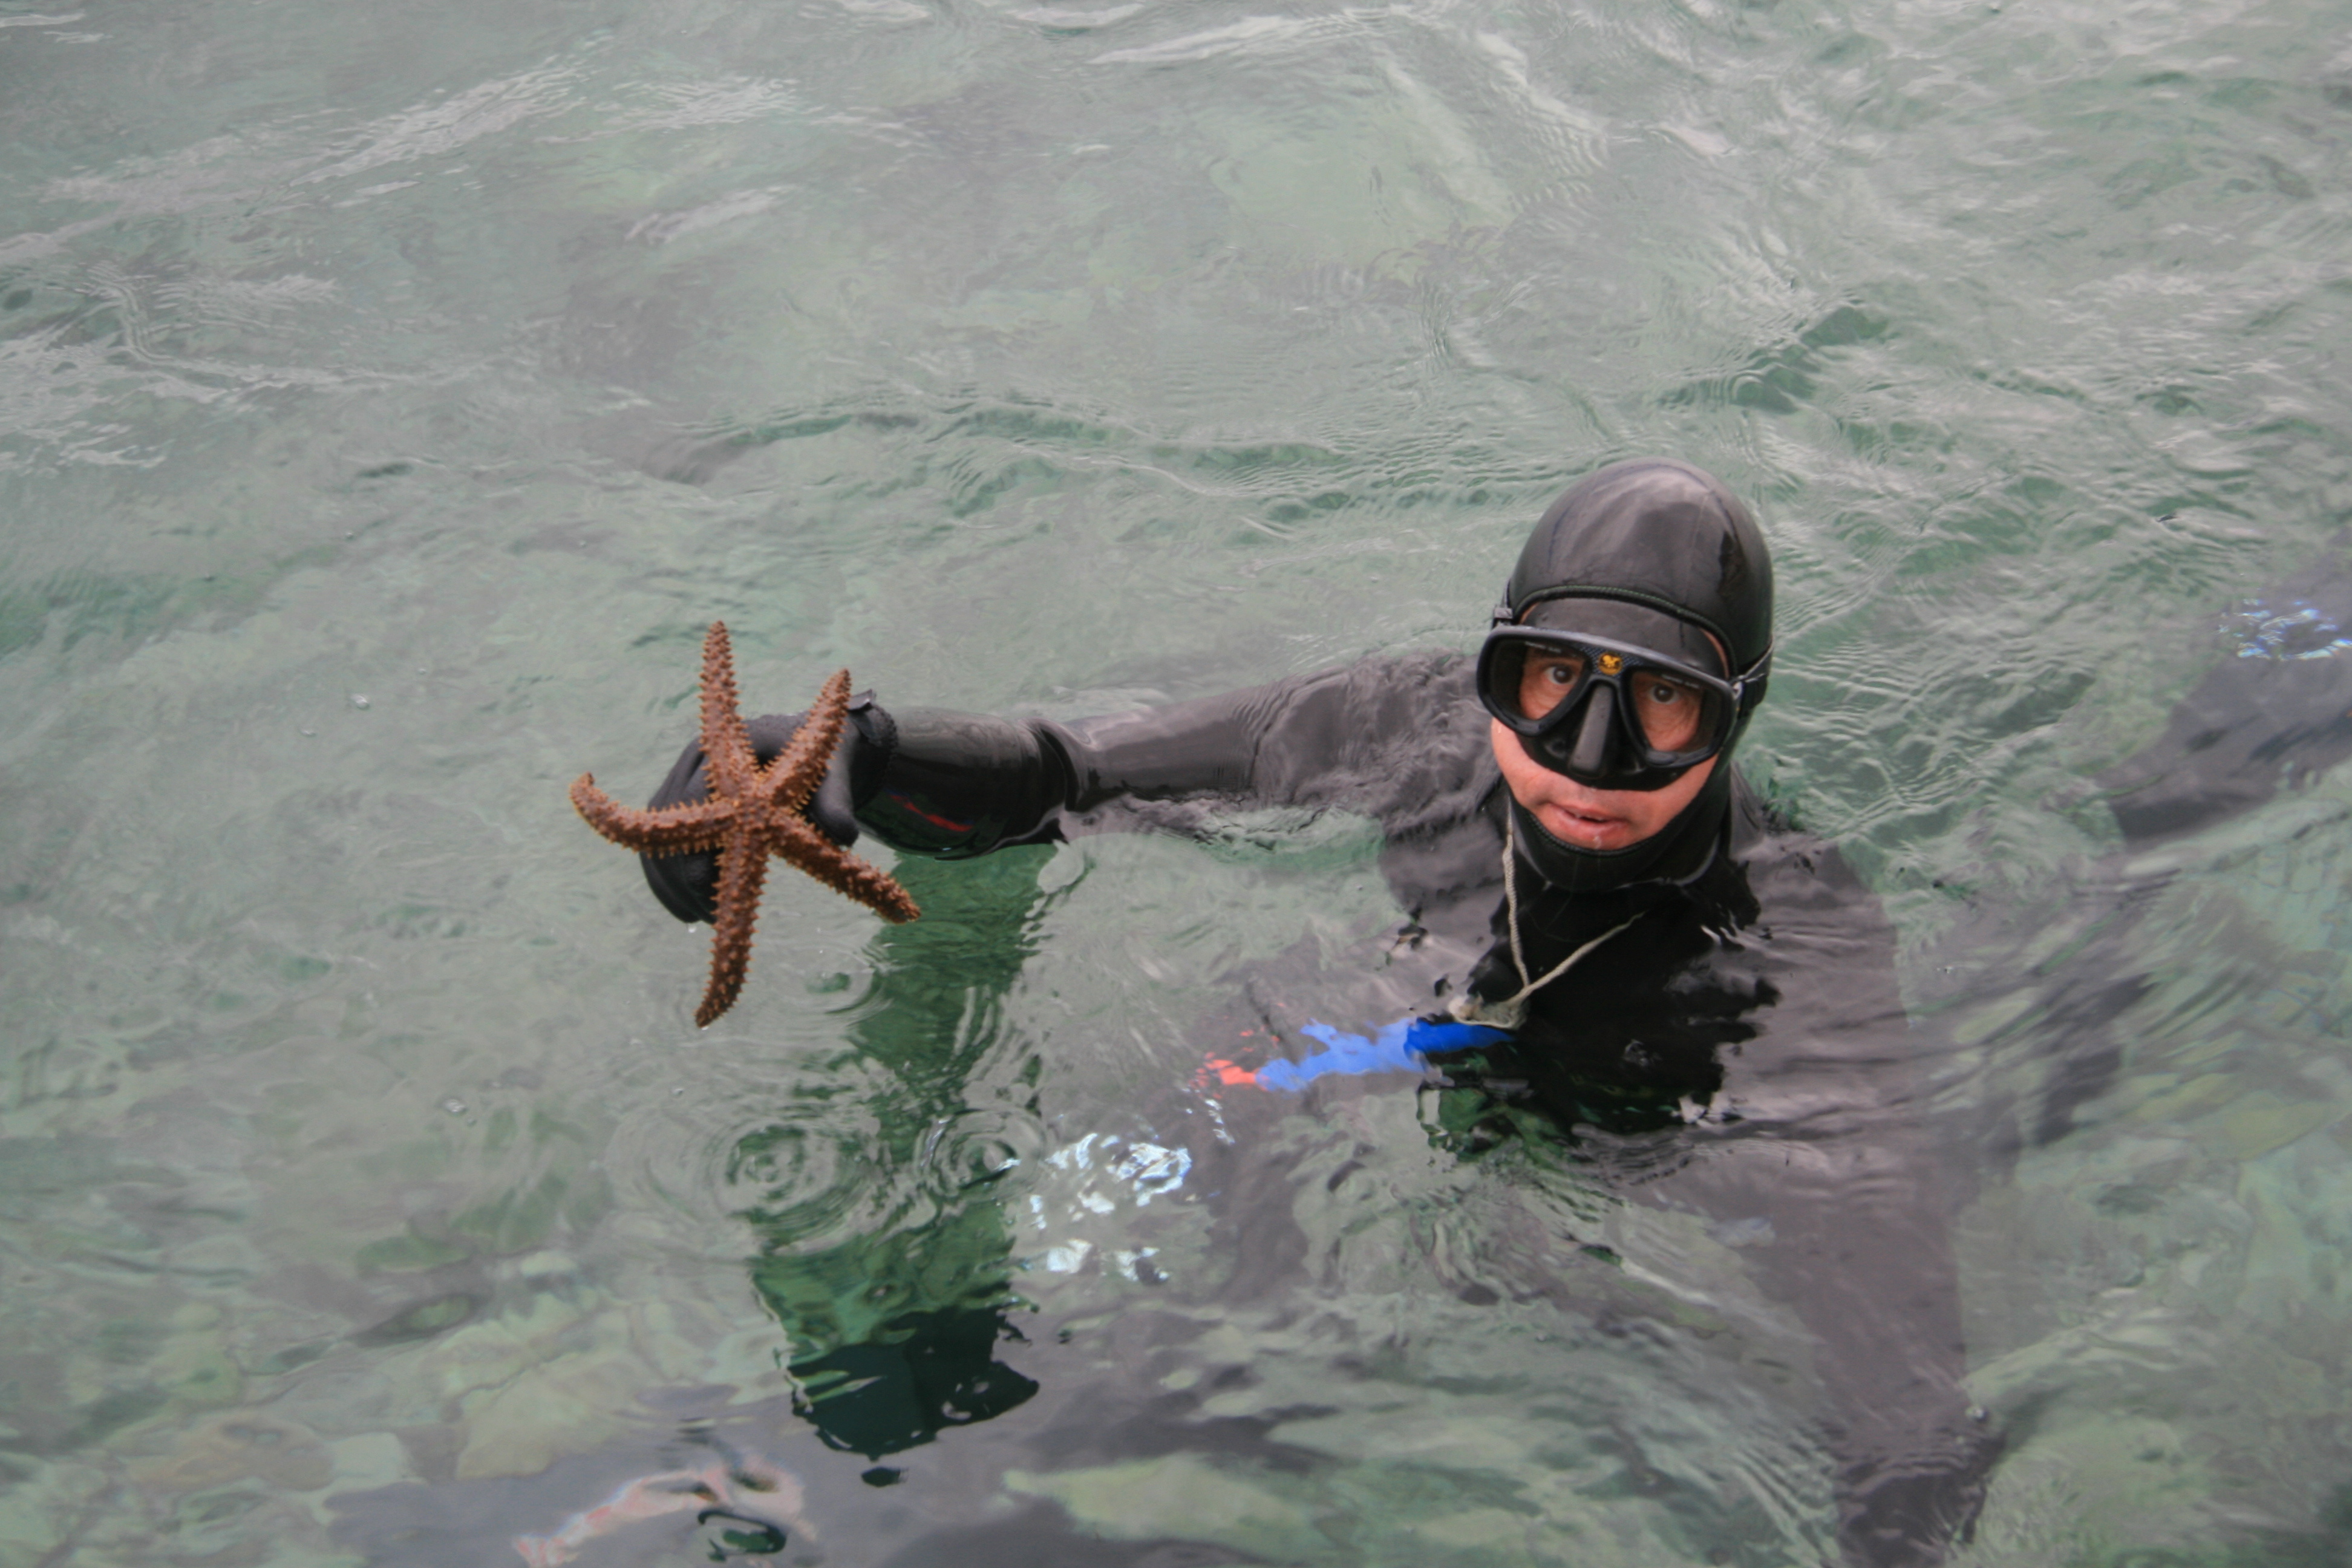 Freediver in well insulated wetsuit returns to the surface with a starfish